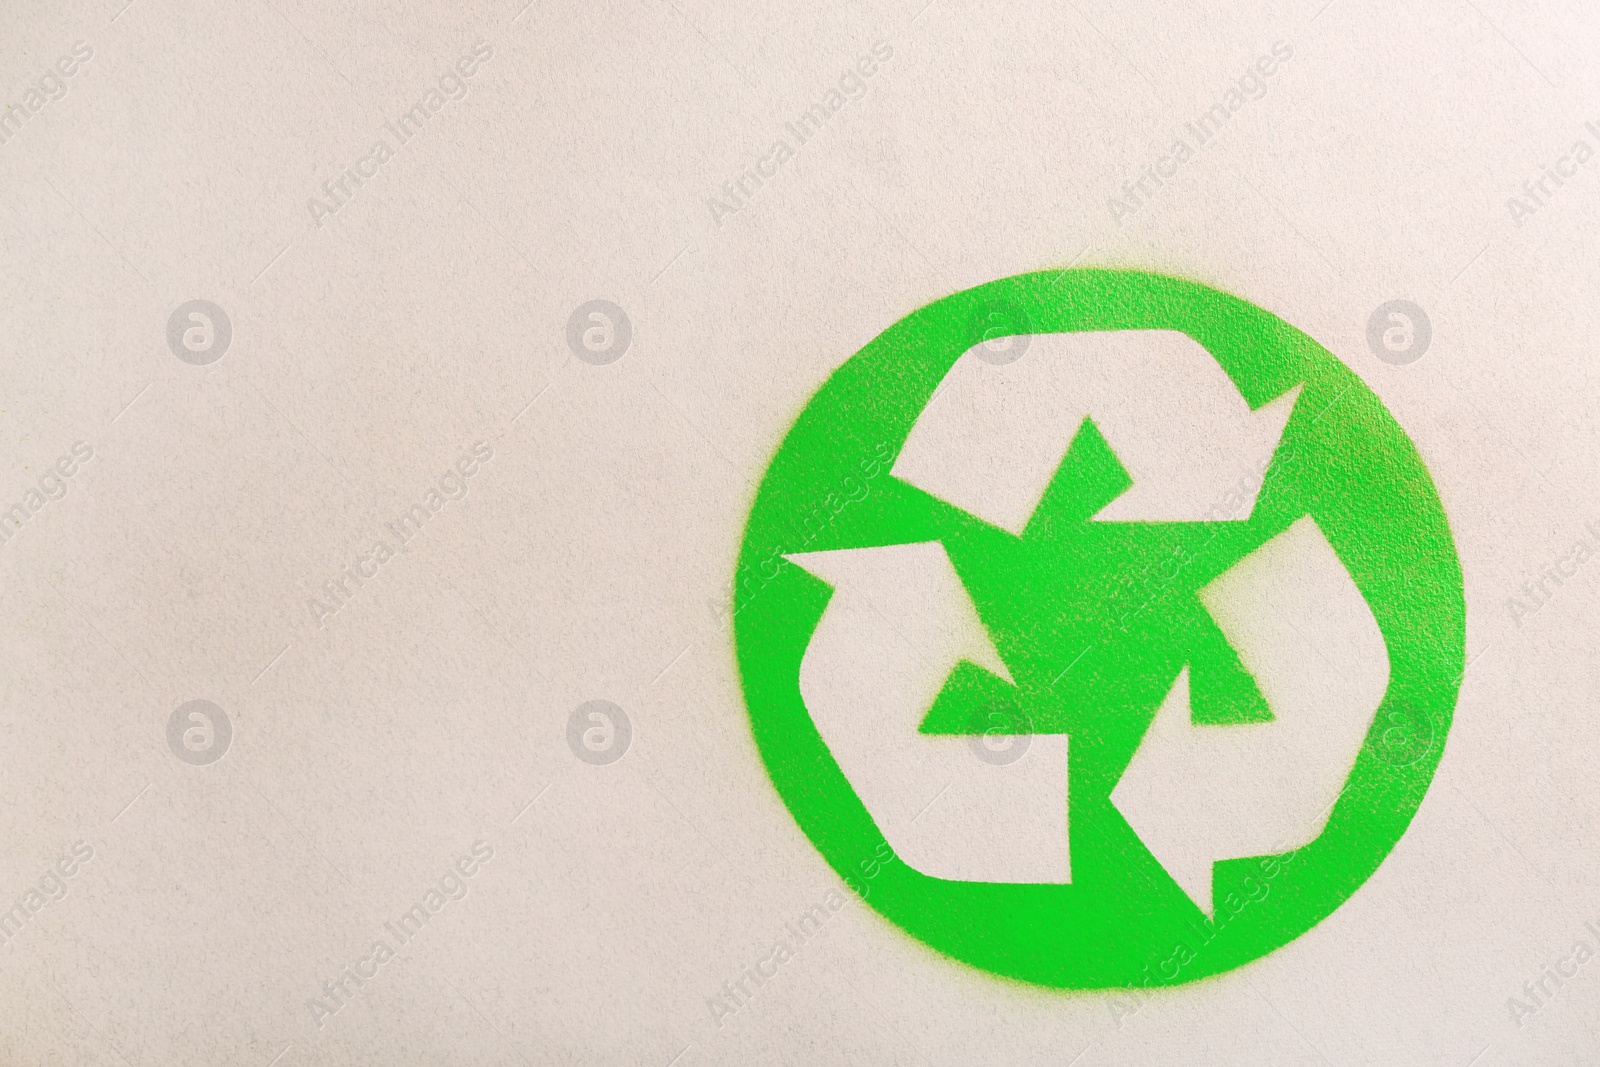 Photo of Recycling symbol on cardboard paper, top view with space for text